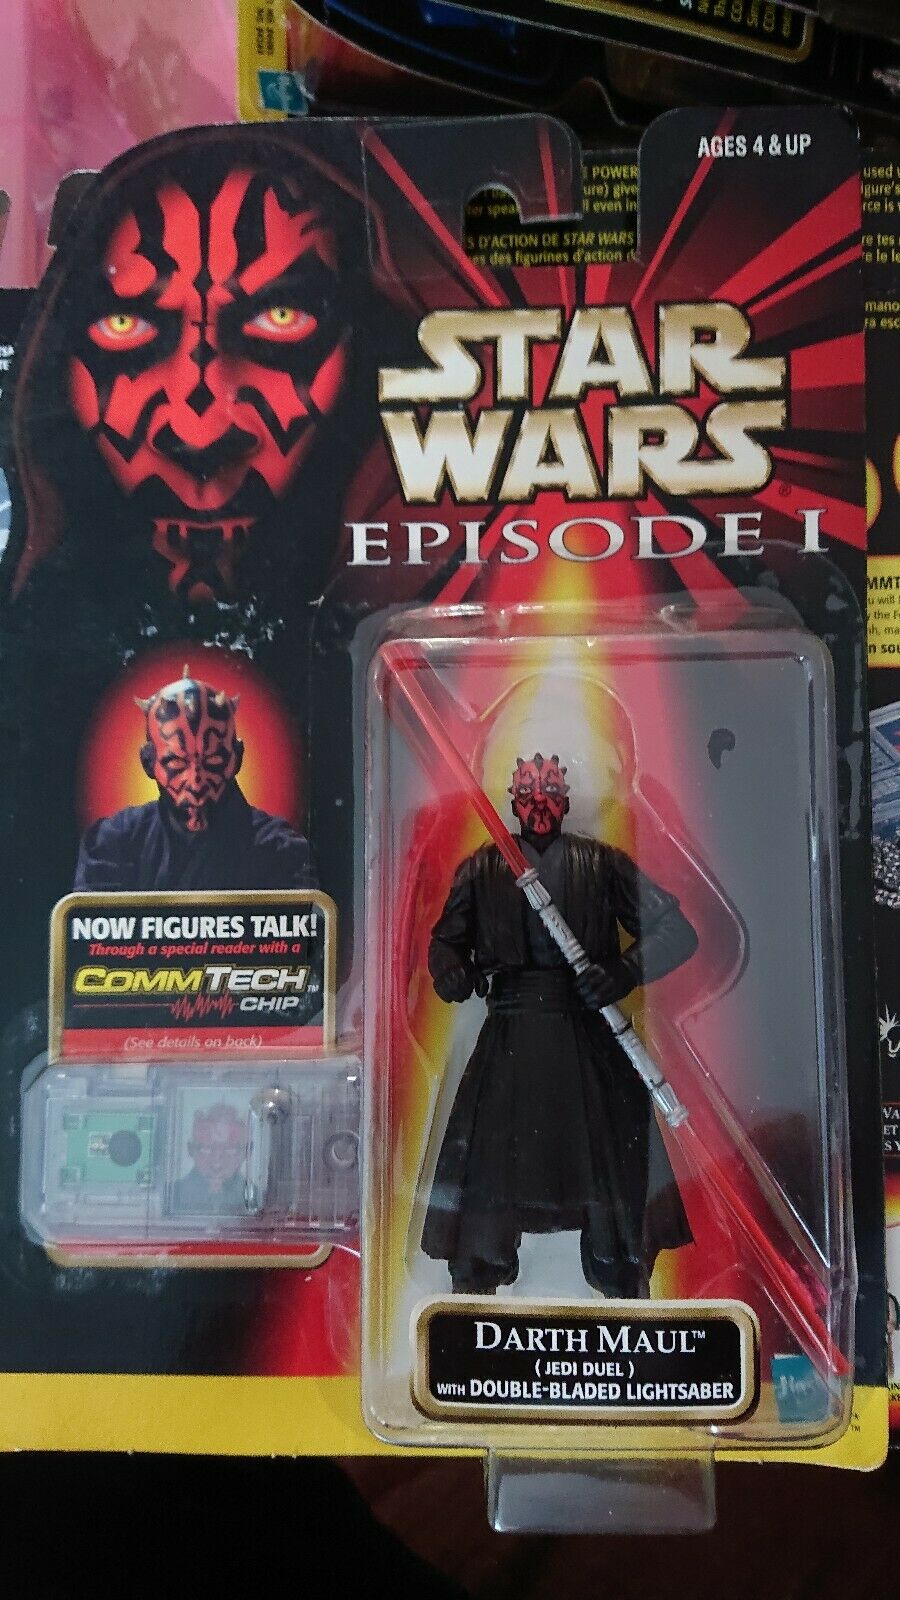 Hasbro Darth Maul Jedi Duel with Double-Bladed Lightsaber Action Figure for sale online